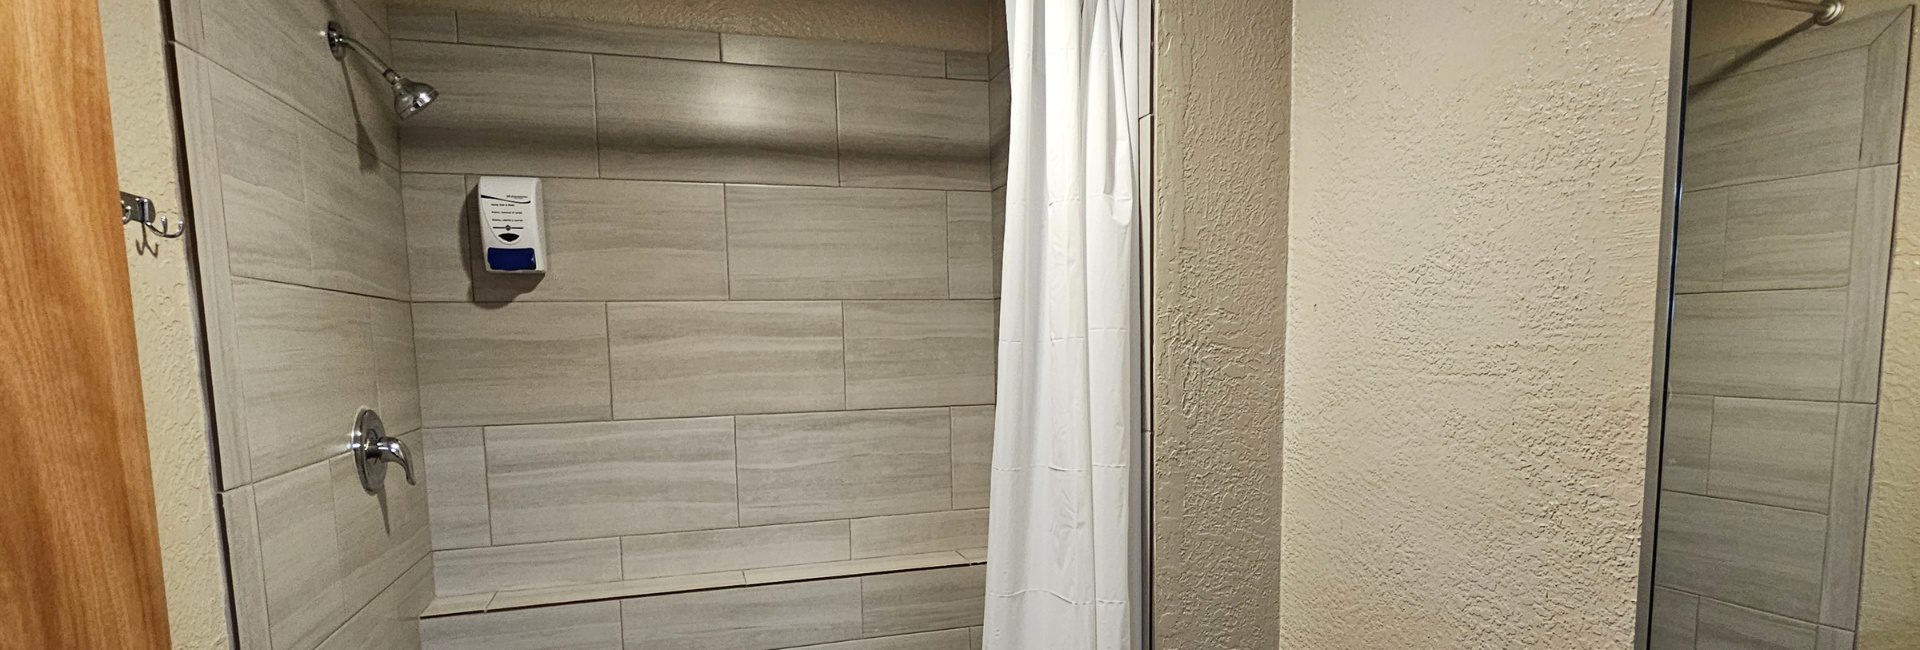 a private shower and locker room at a midtown albuquerque gym